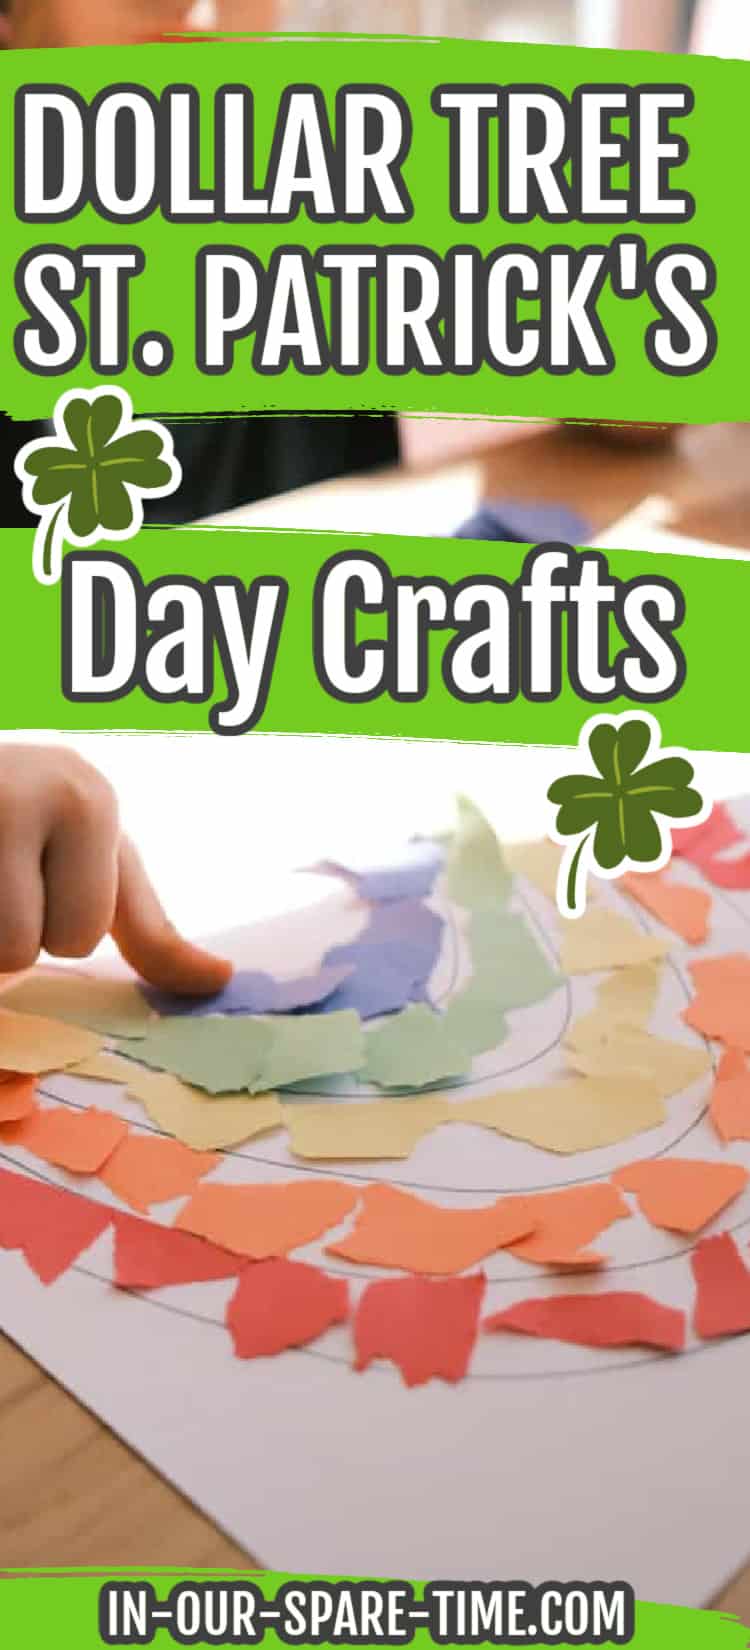 Looking for St. Patrick's Day decorations that you can make? Check out these easy Dollar Tree St Patricks Day crafts you can make today.